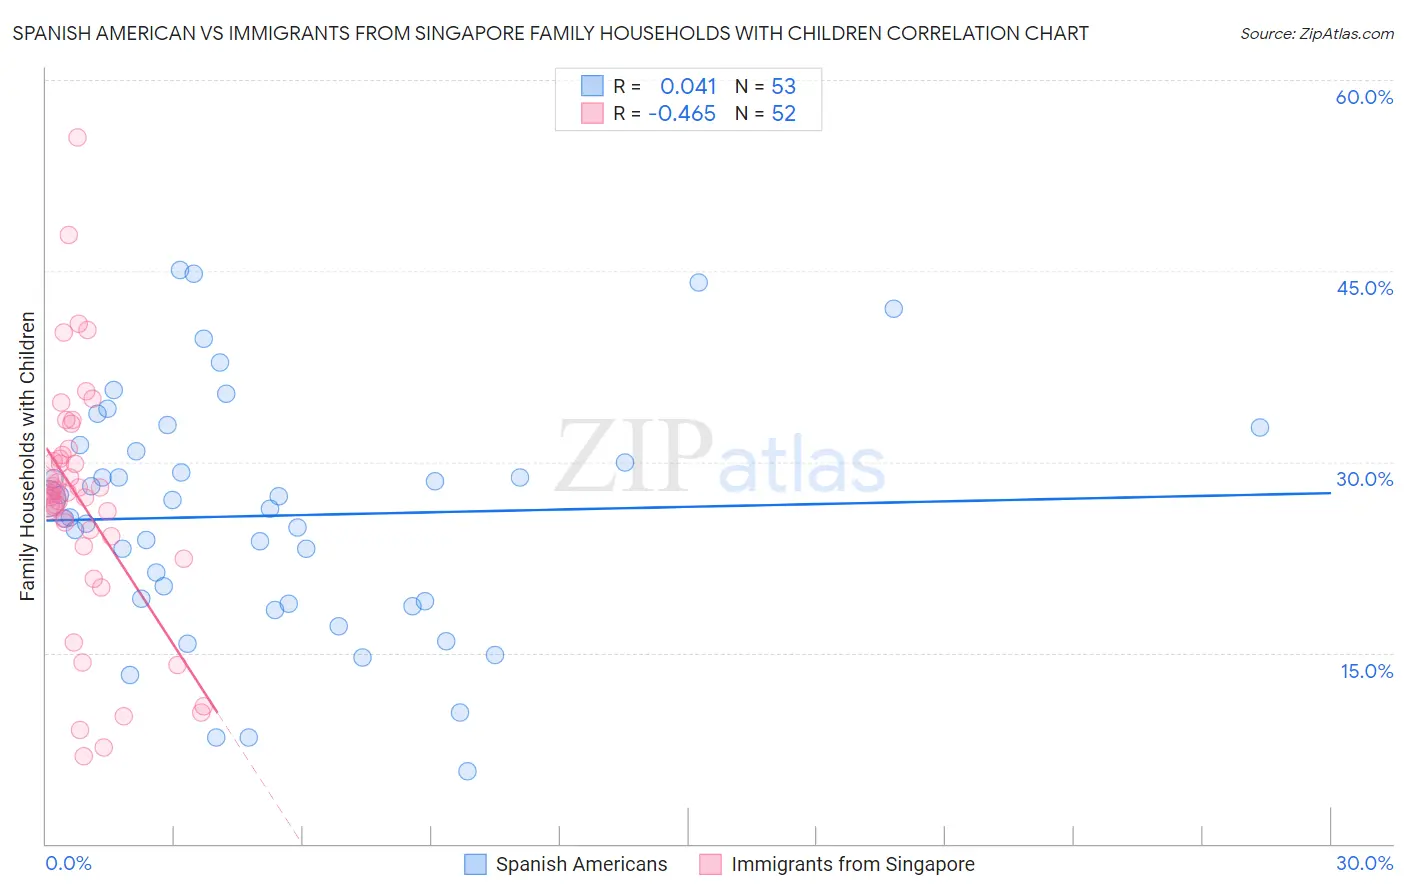 Spanish American vs Immigrants from Singapore Family Households with Children